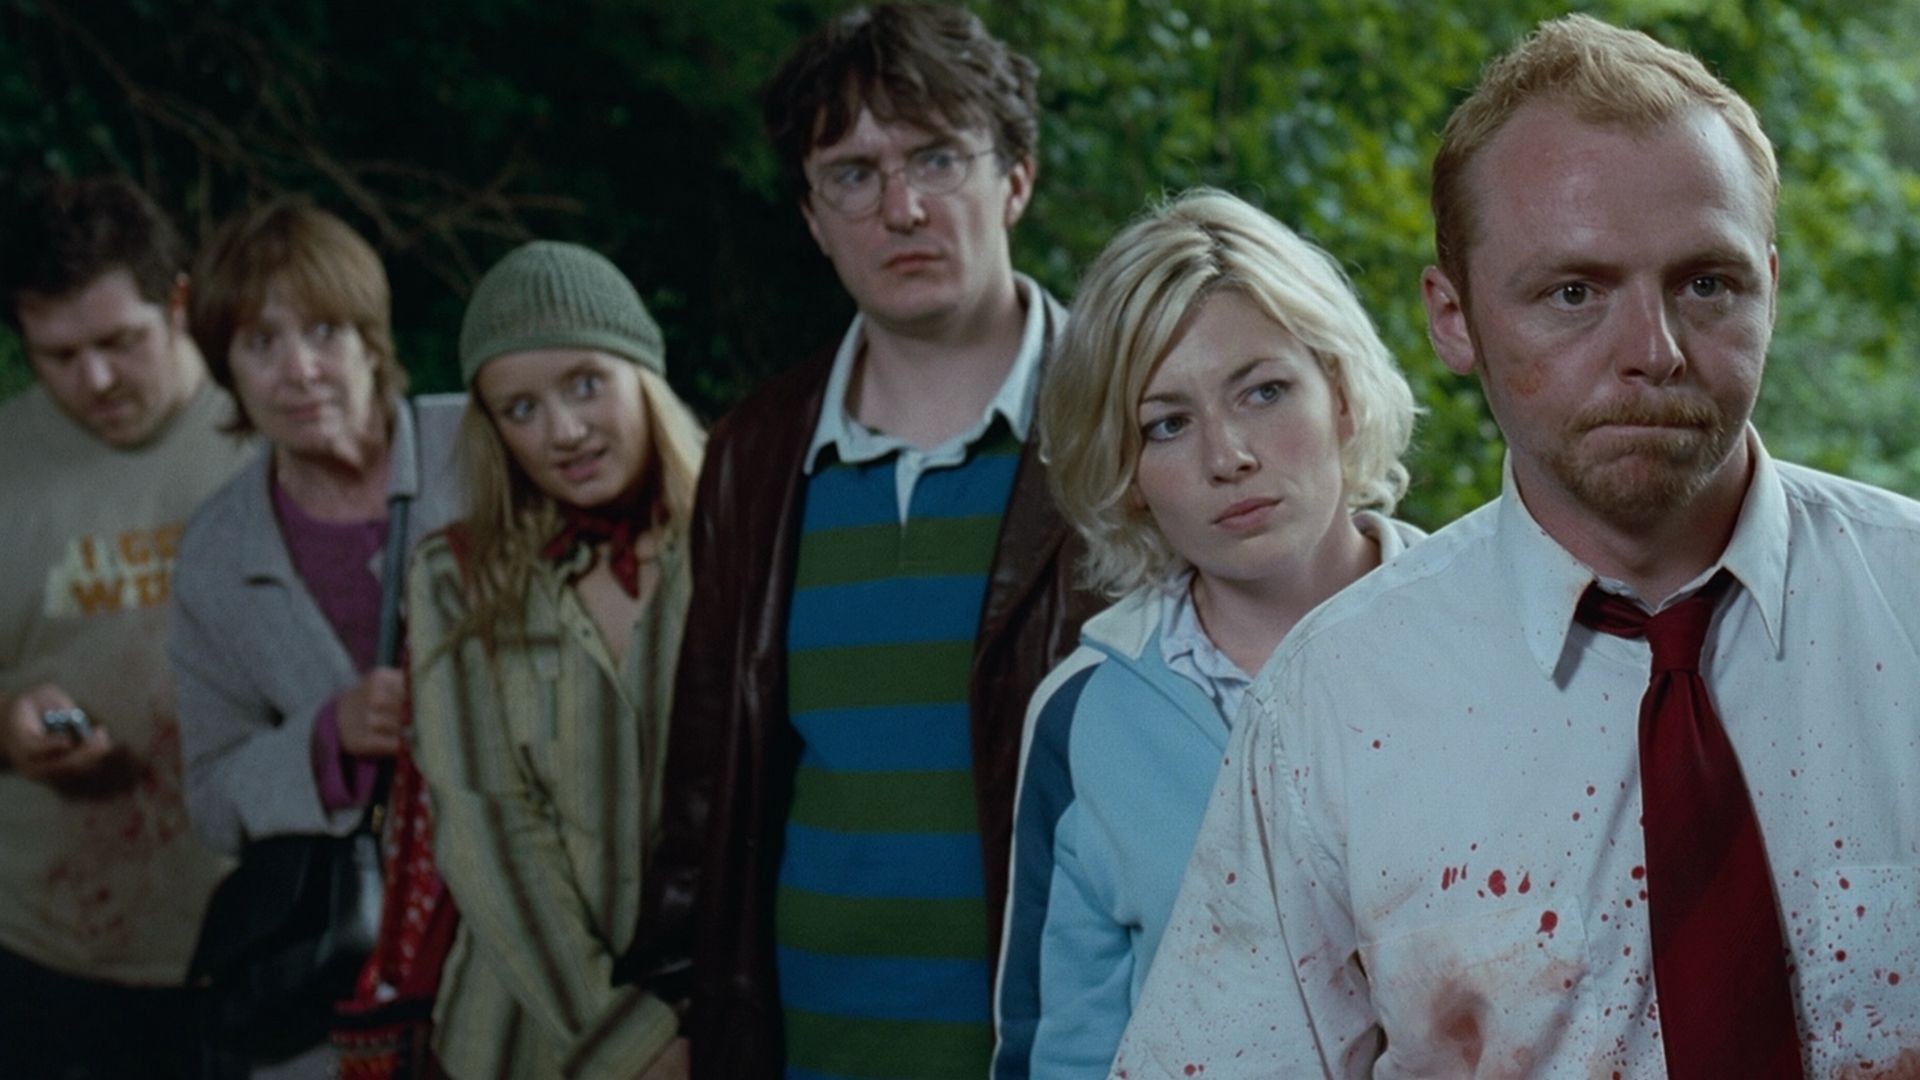 HQ Shaun Of The Dead Wallpapers | File 223.54Kb